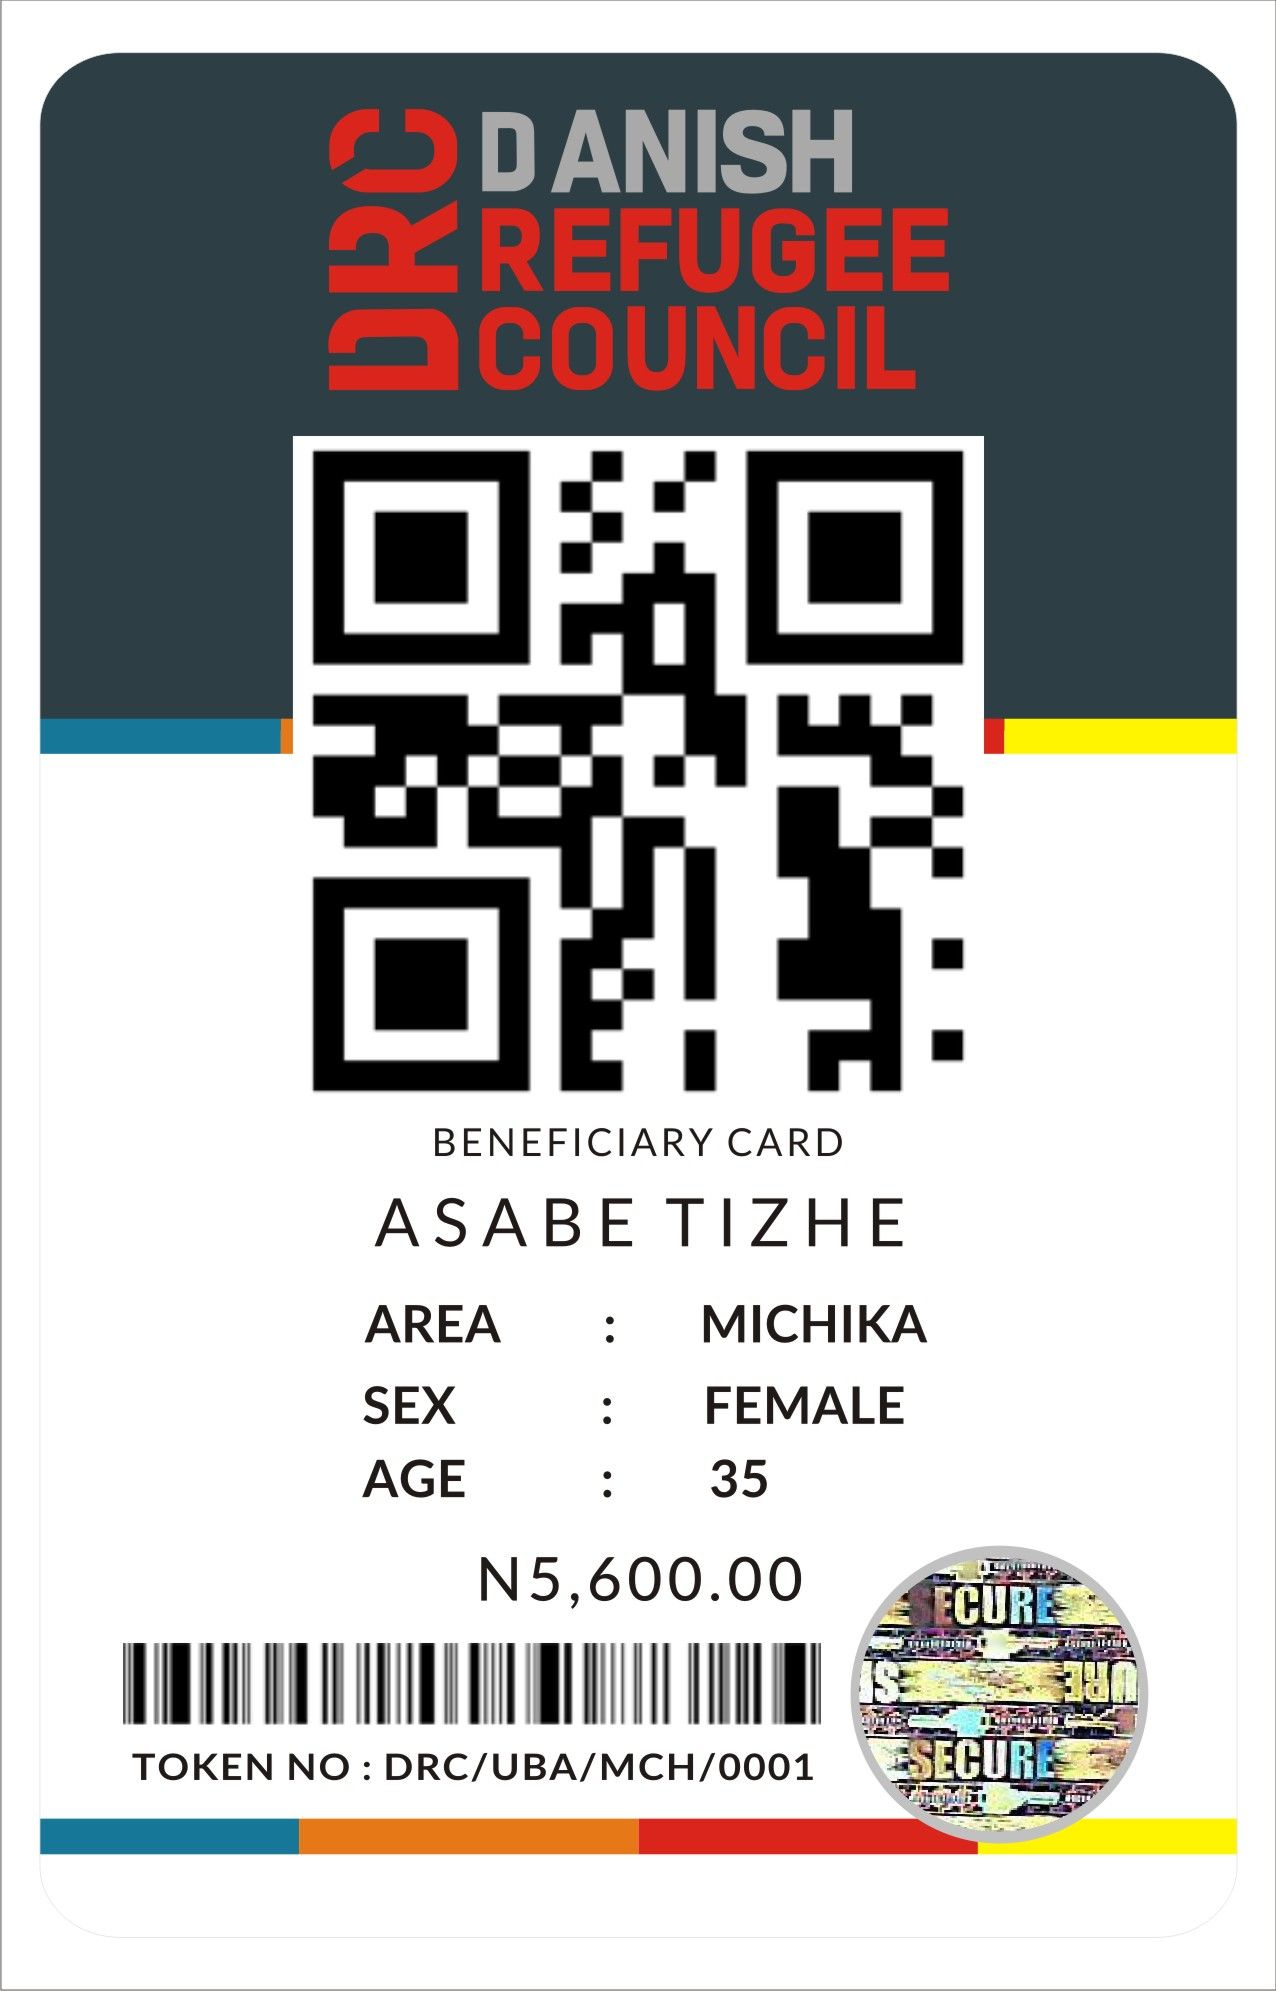 CALL EMMANUEL ON 08176499649 TO PRINT QR CODE, BAR CODE, AUTHENTICATION LABELS ETC.